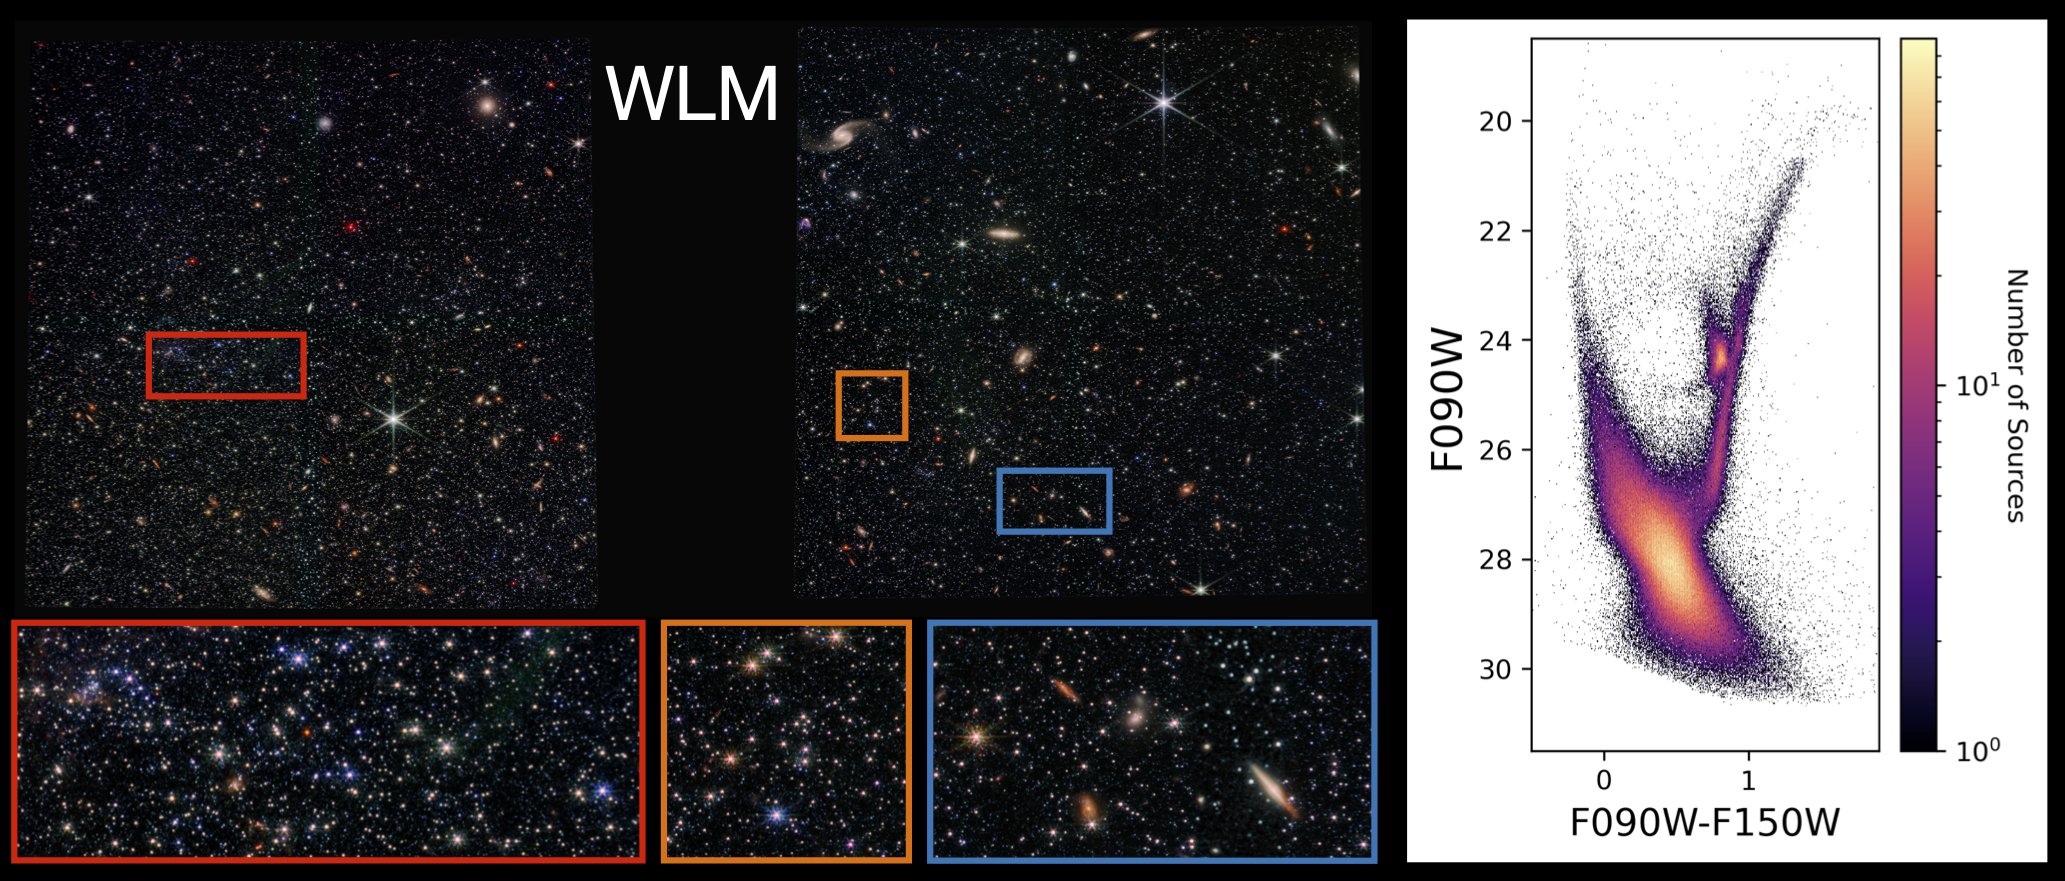 dwarf galaxy SLM, with selective regions highlighted and zoomed in to show the resolving power of JWST. the right is a color-magnitude diagram of WLM in its entirety